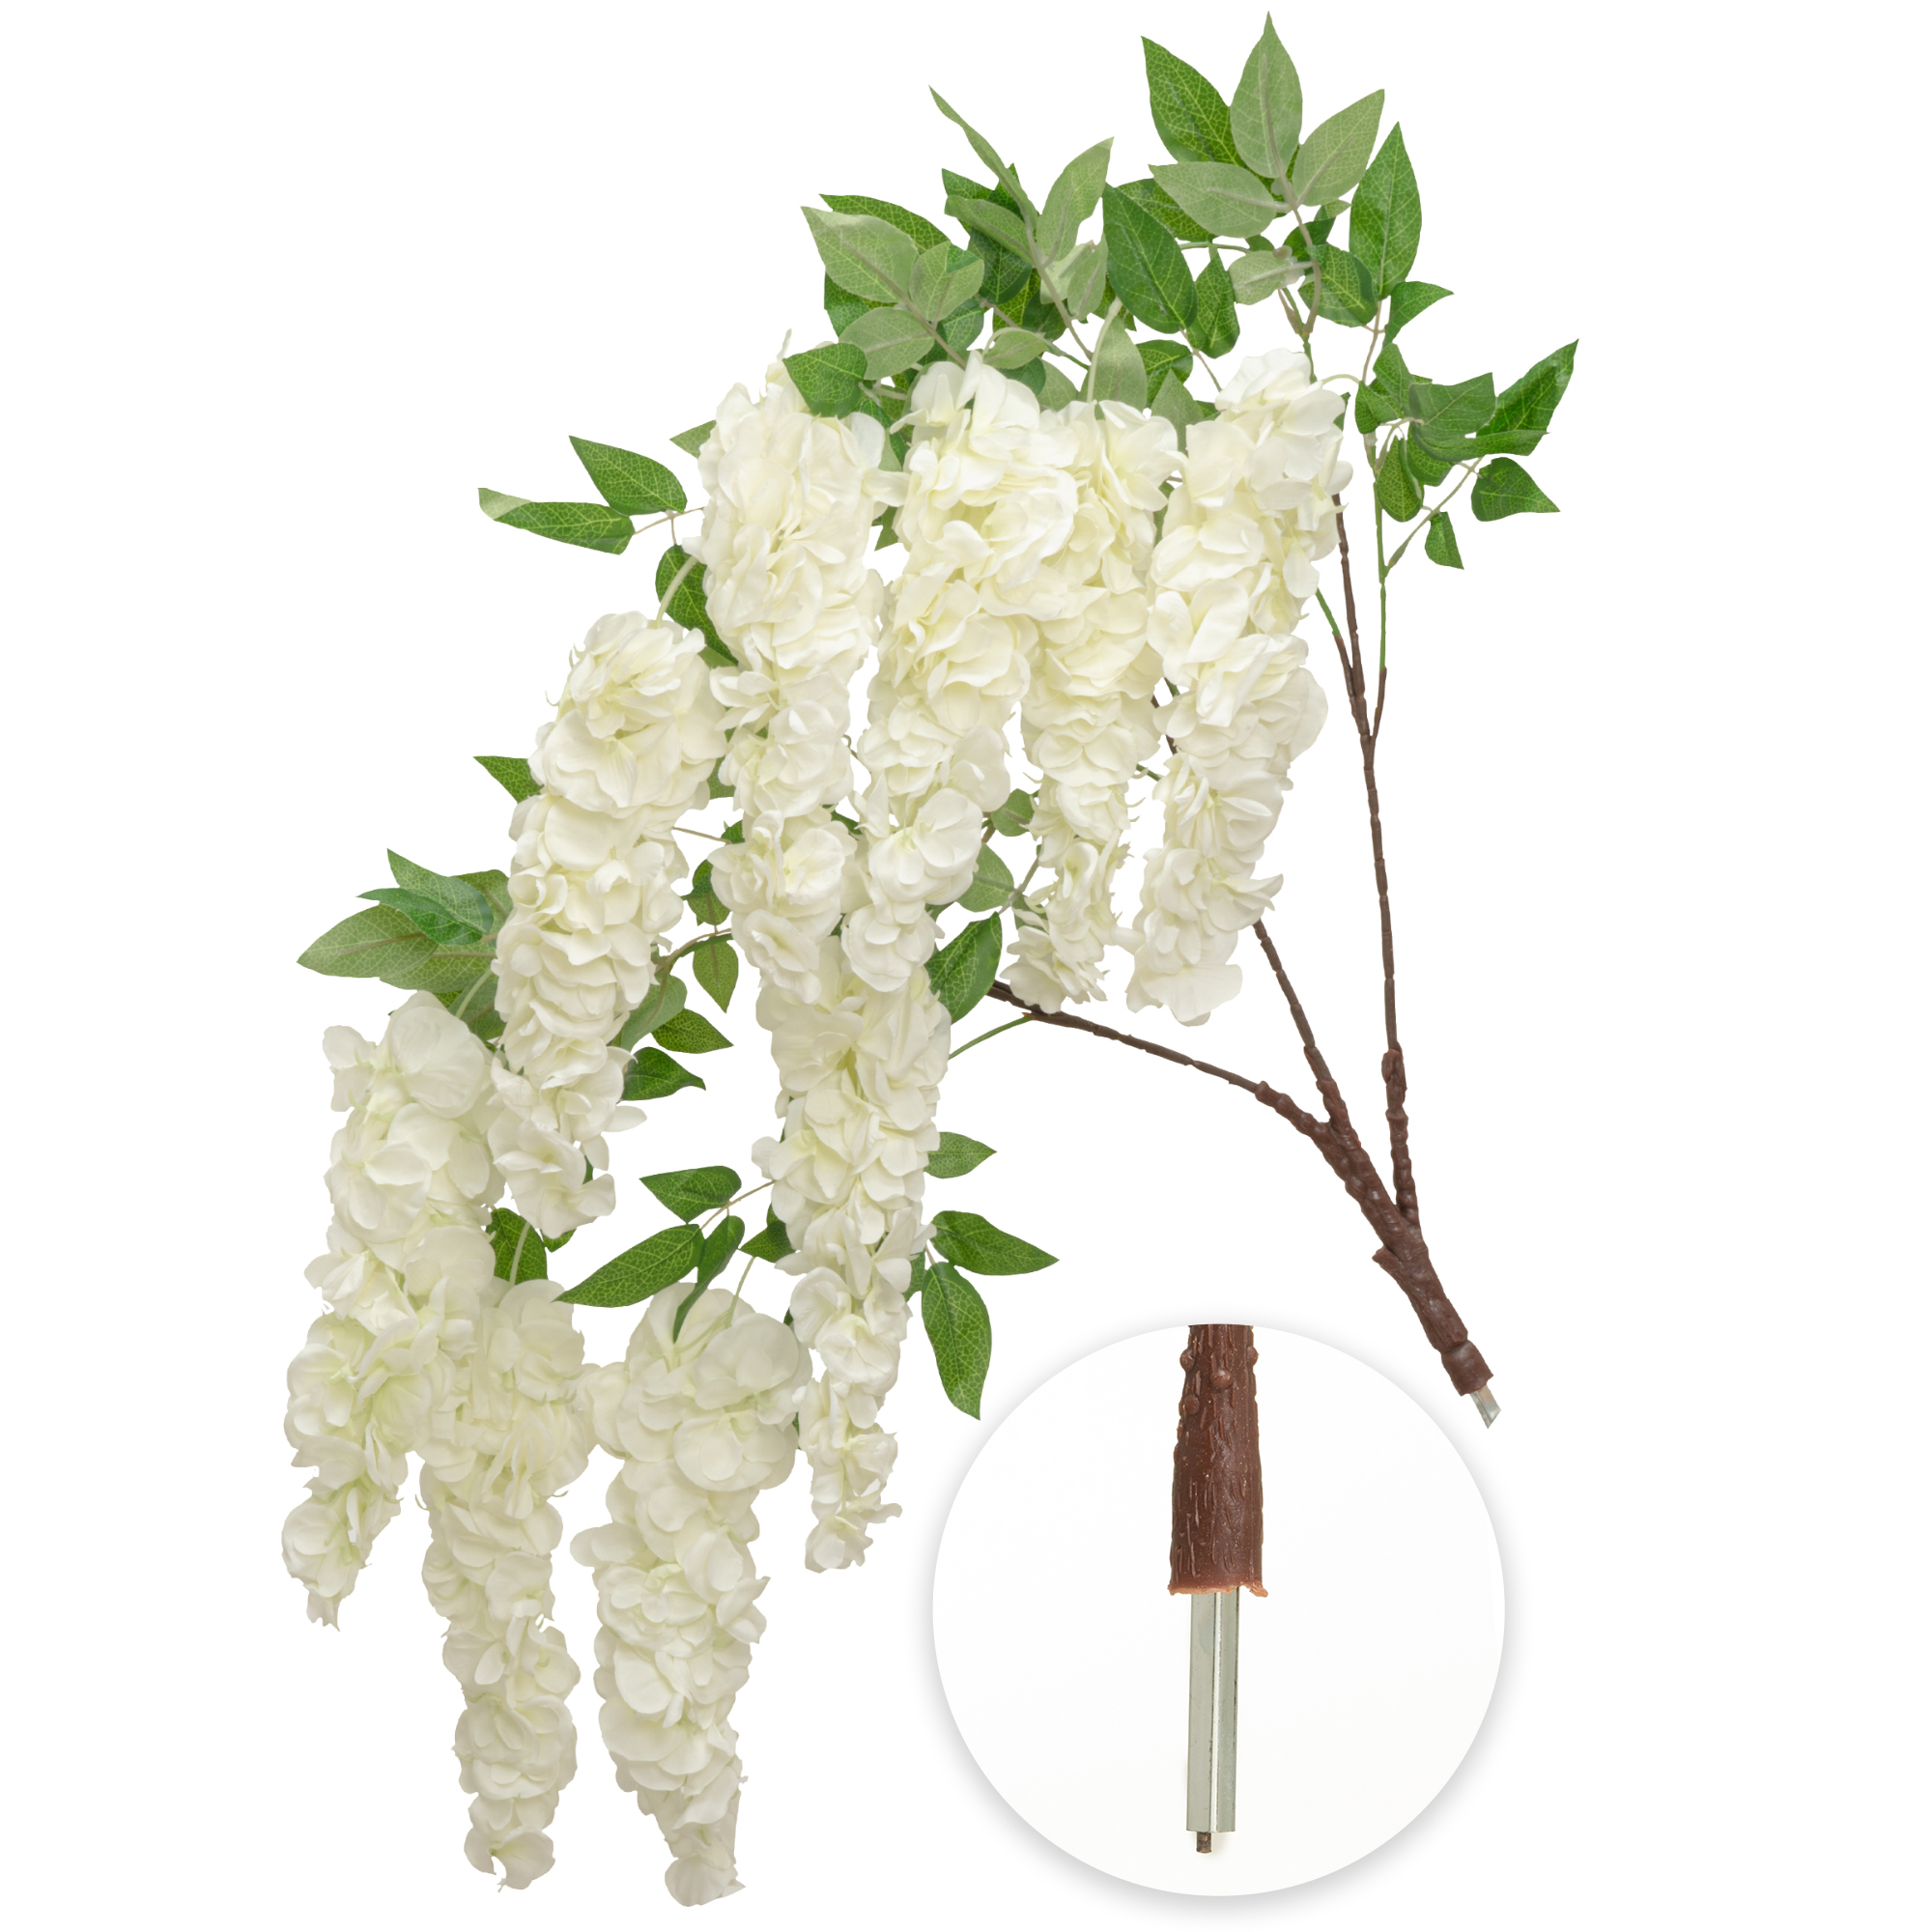 Interchangeable Wisteria Branch for Event Tree - White